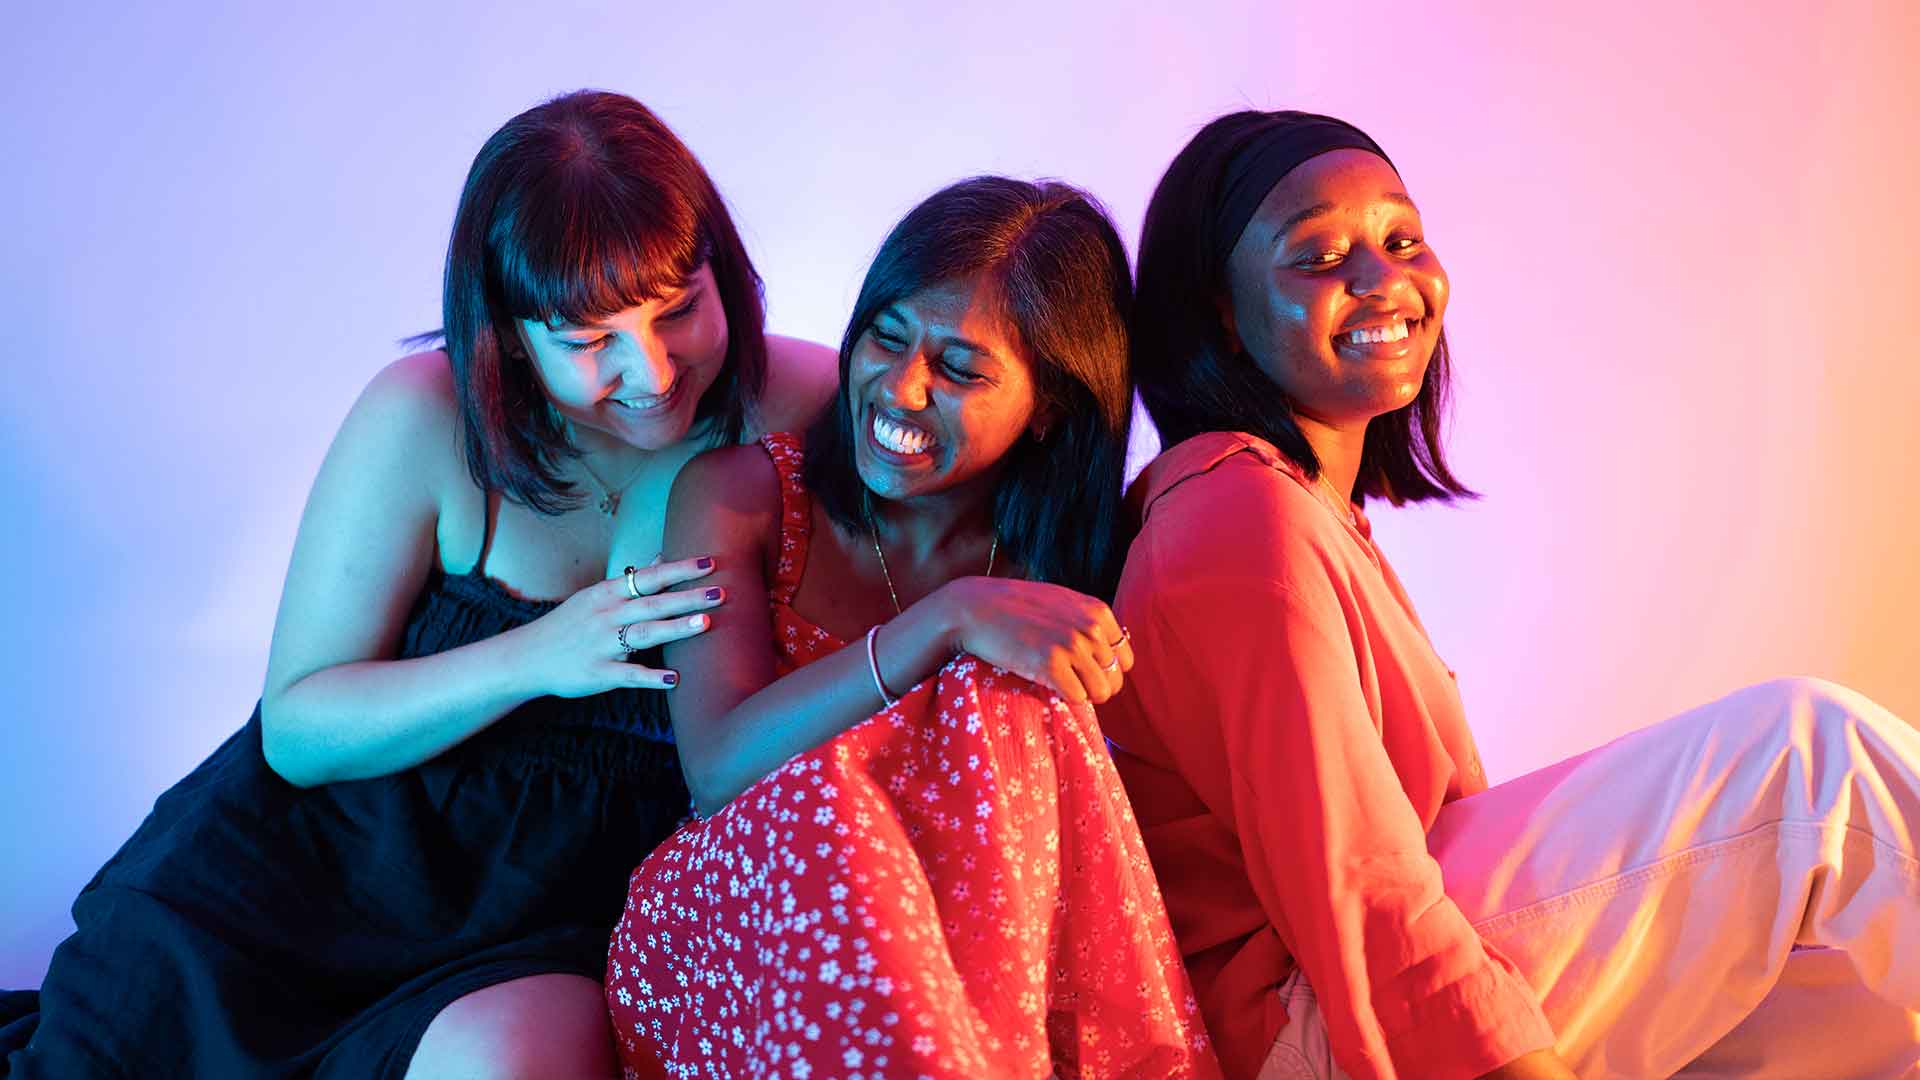 Three students sat on the floor laughing, lit up by neon orange and pink lighting